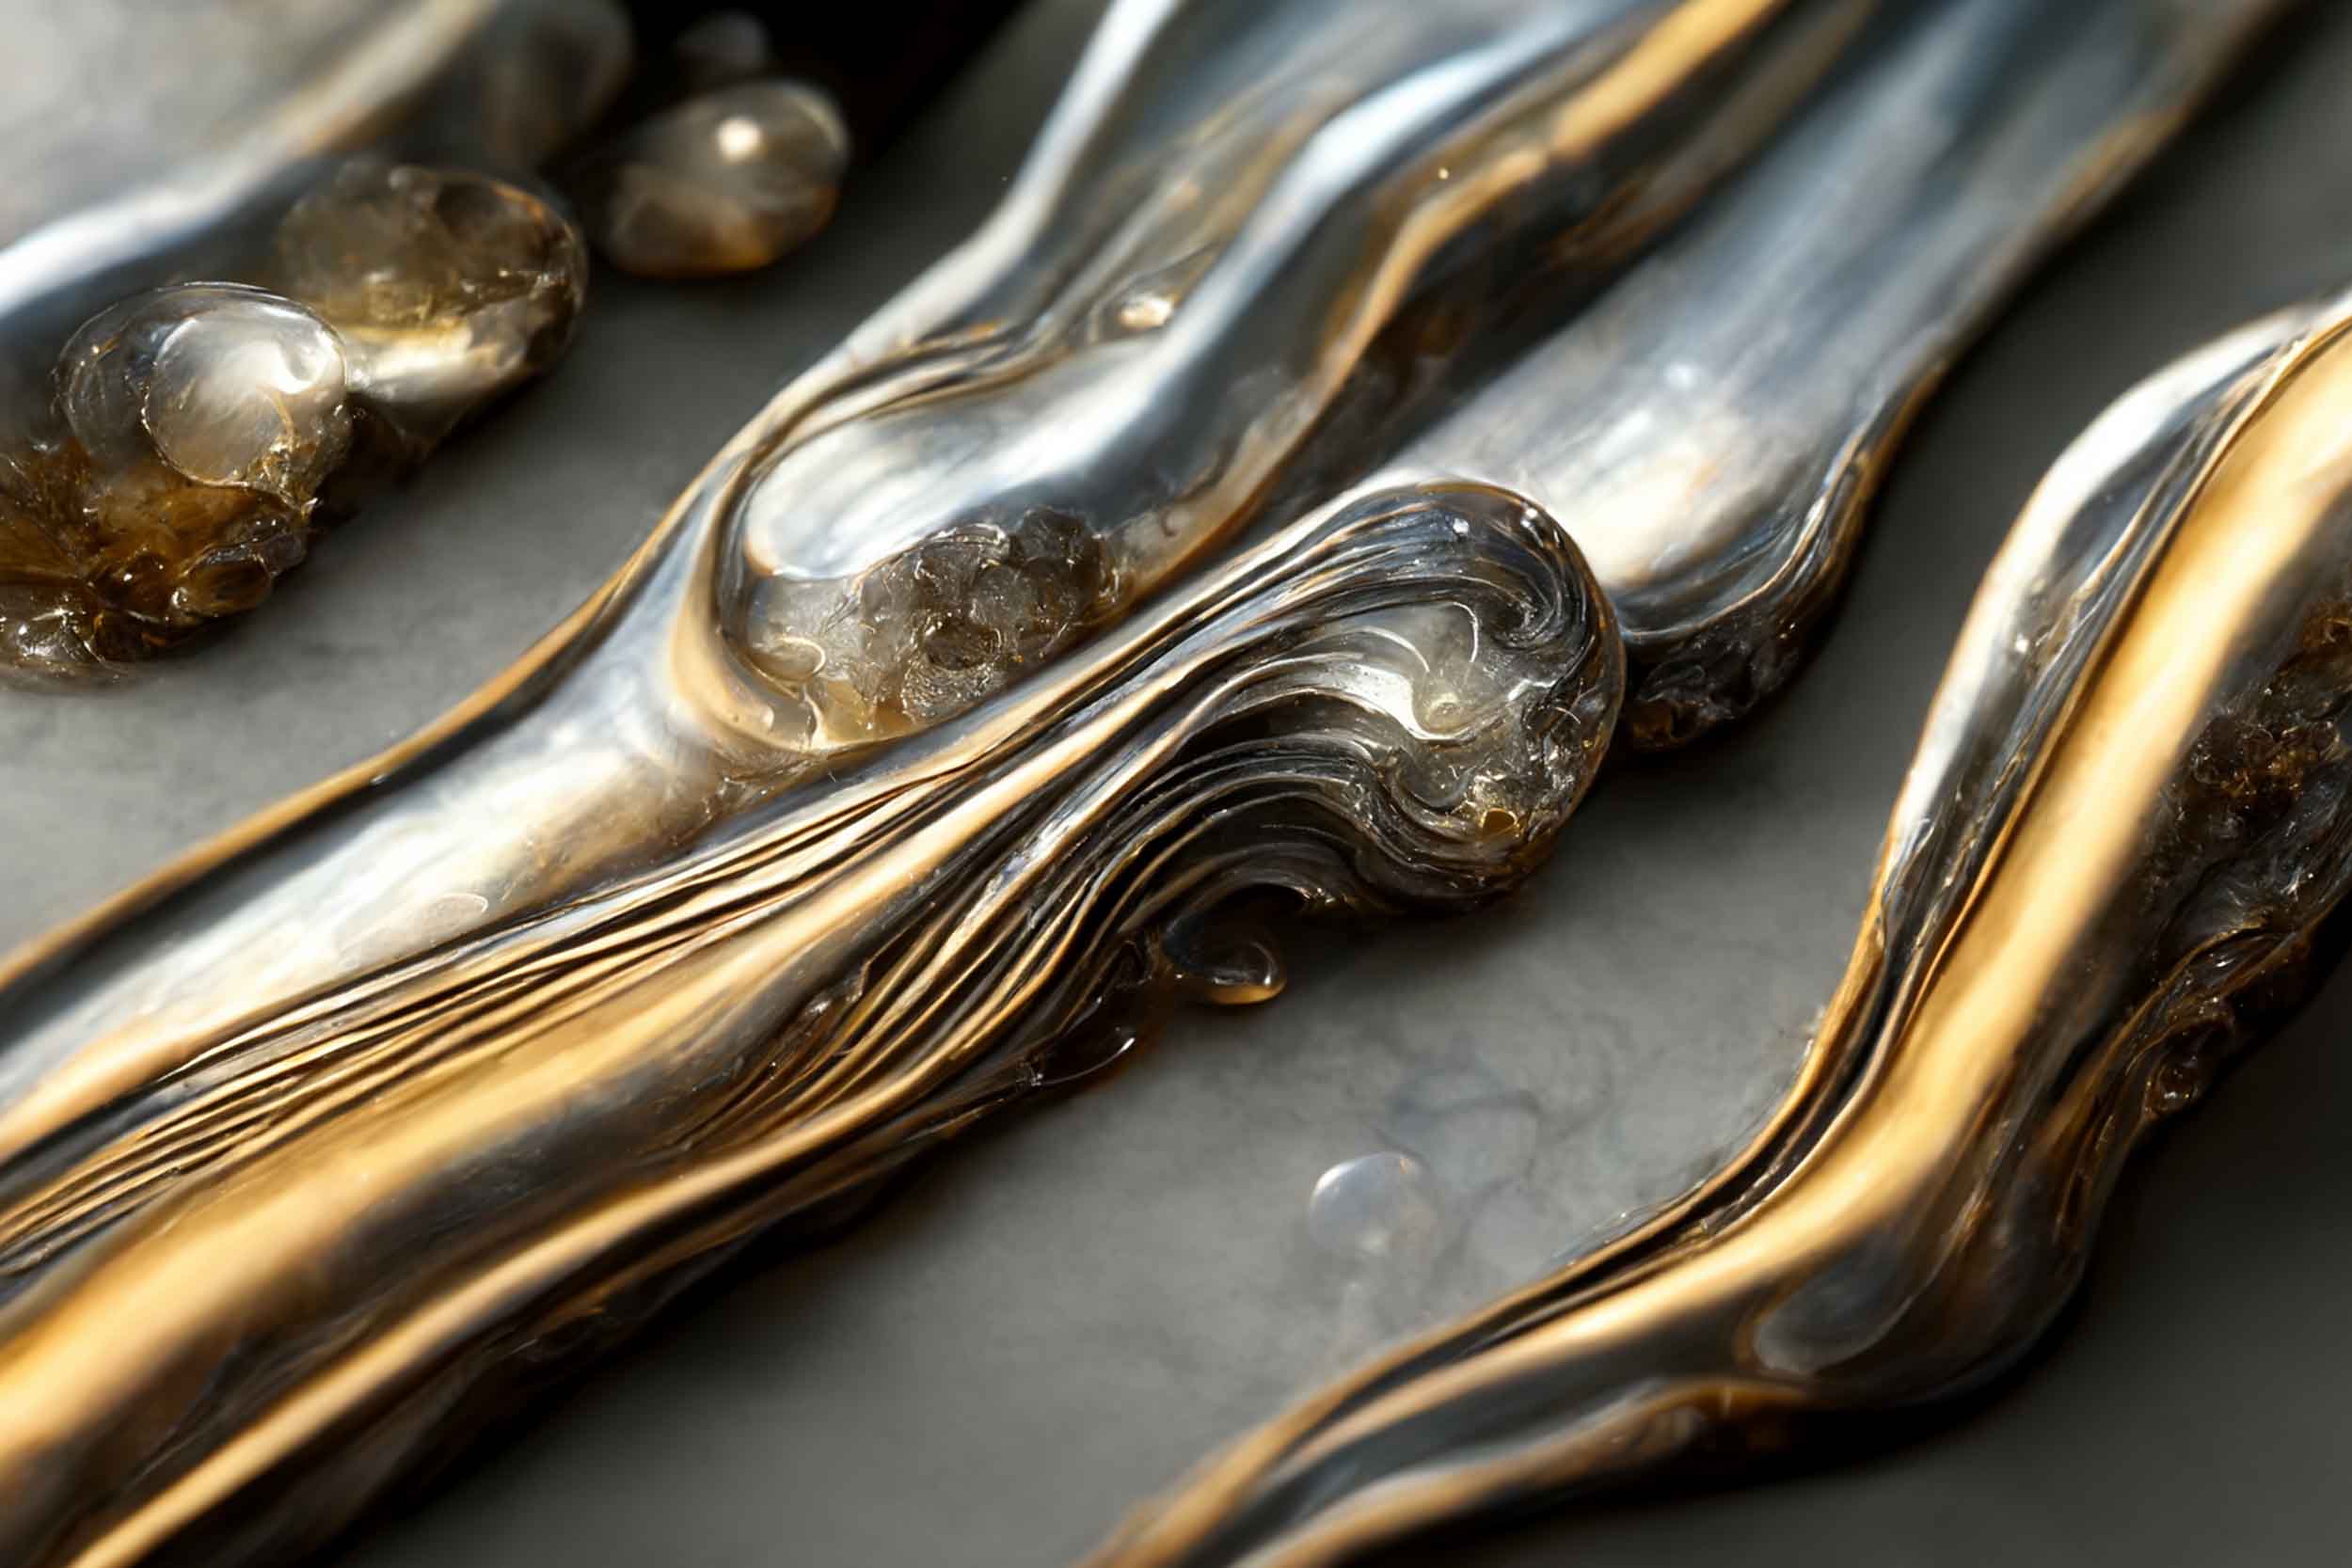 Artist and AI rendering of luminous, molten metals flowing in rivulets across a gray surface